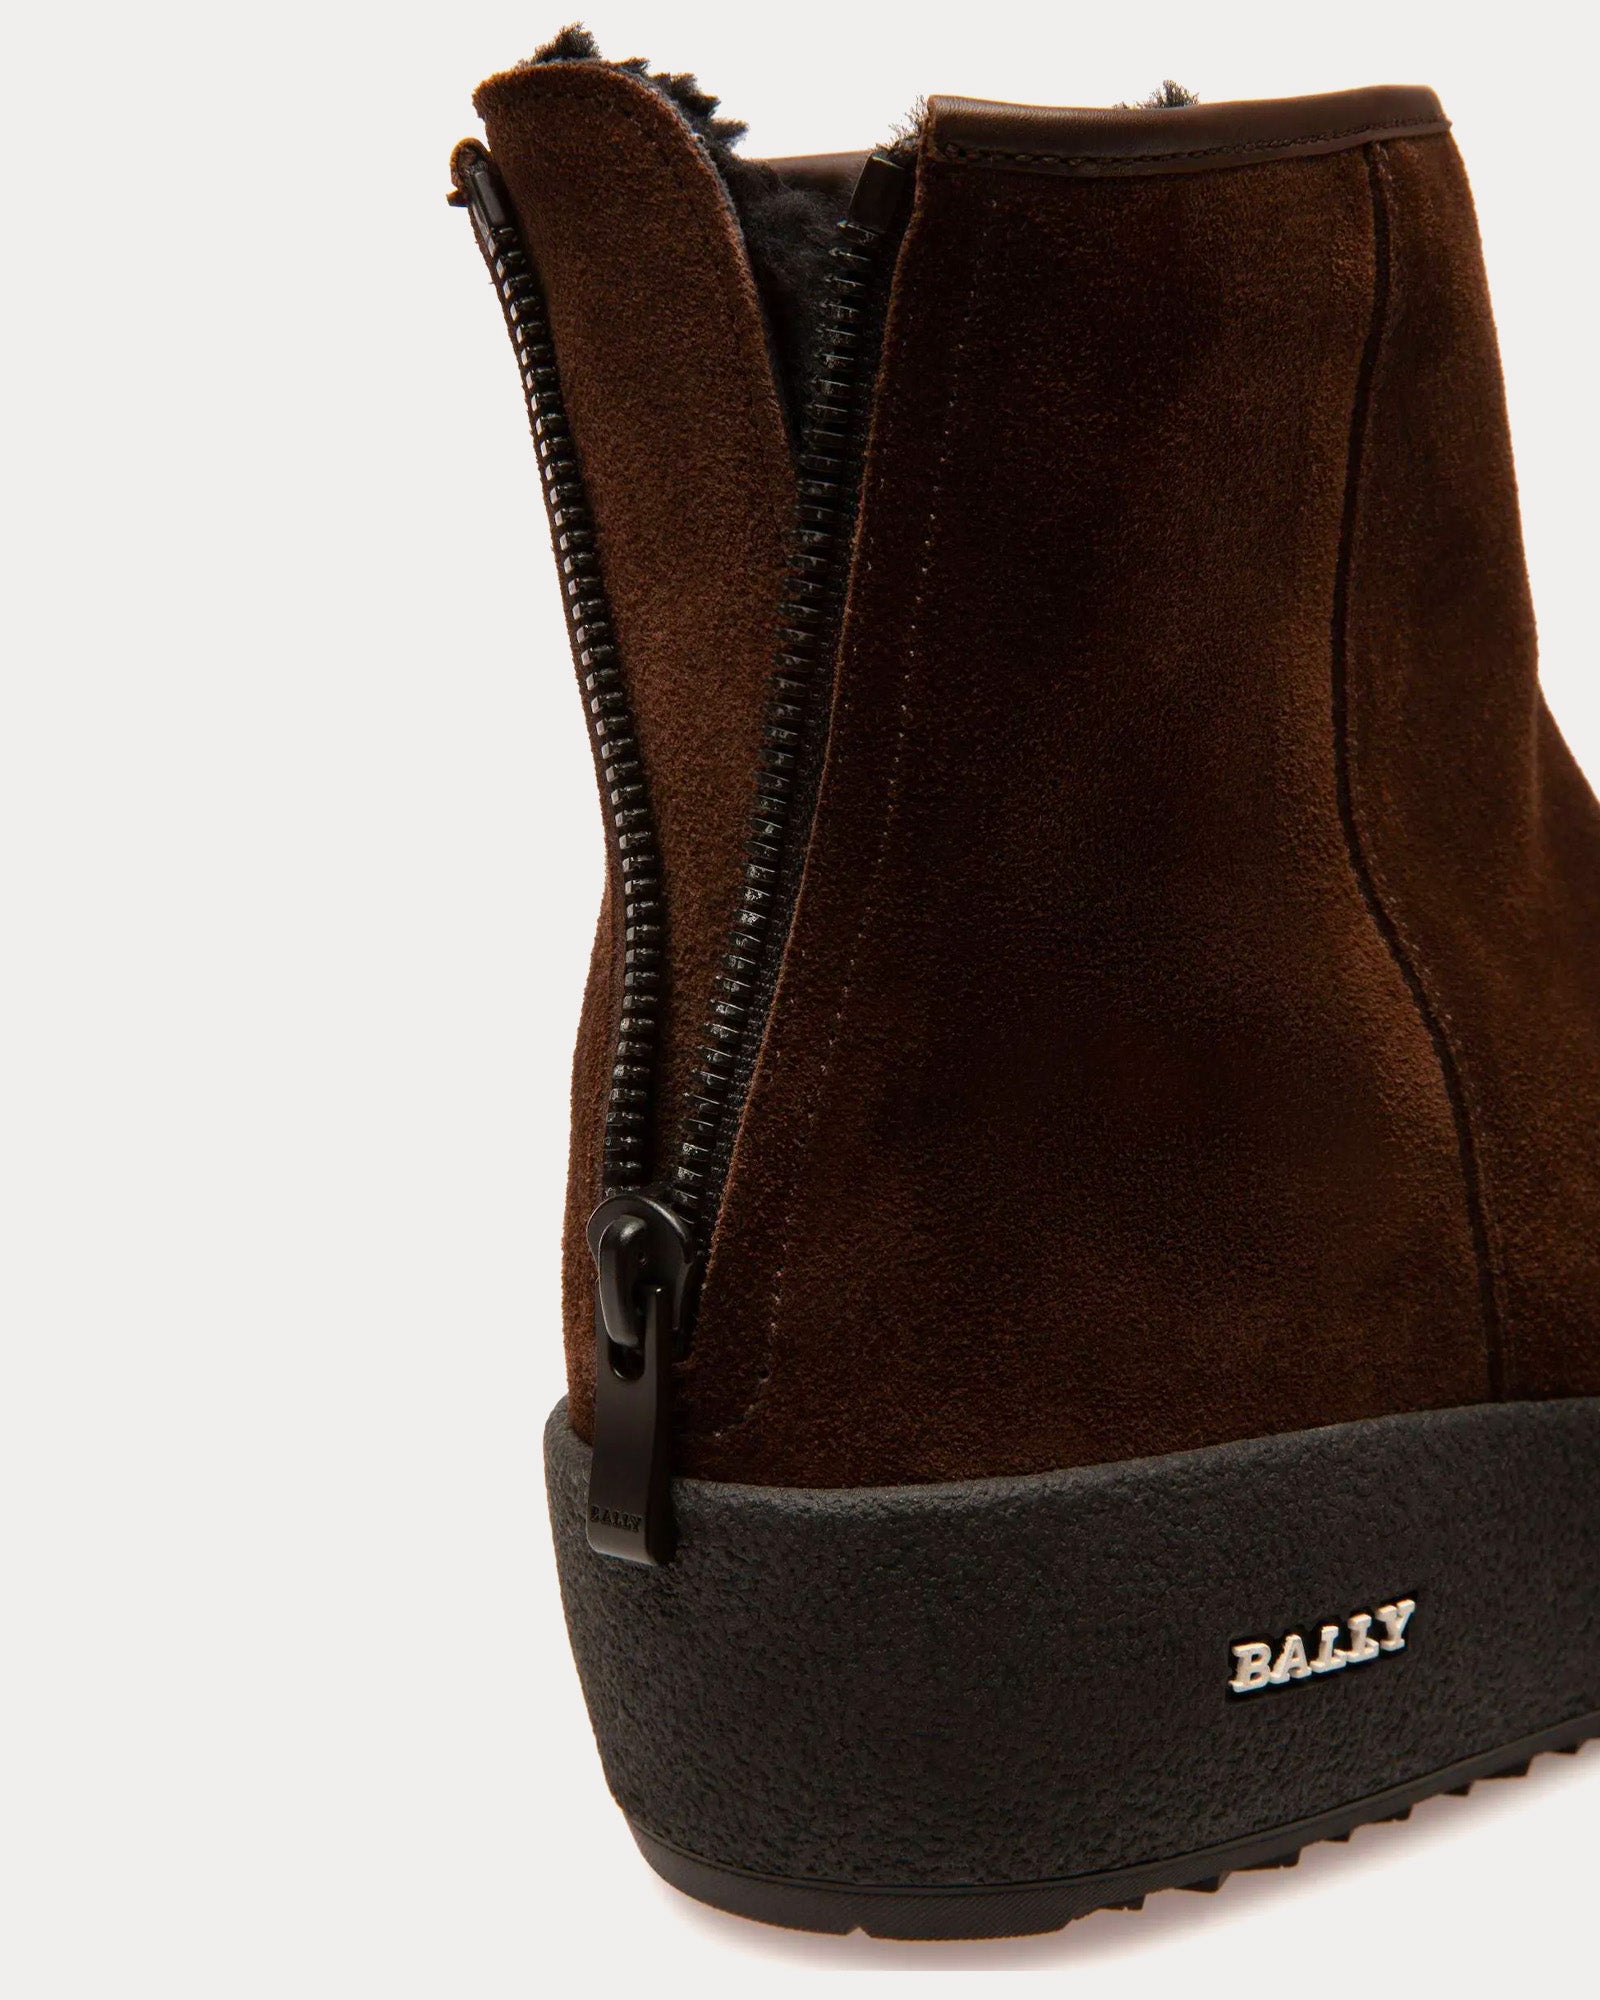 Bally - Guard Leather Brown Snow Boots